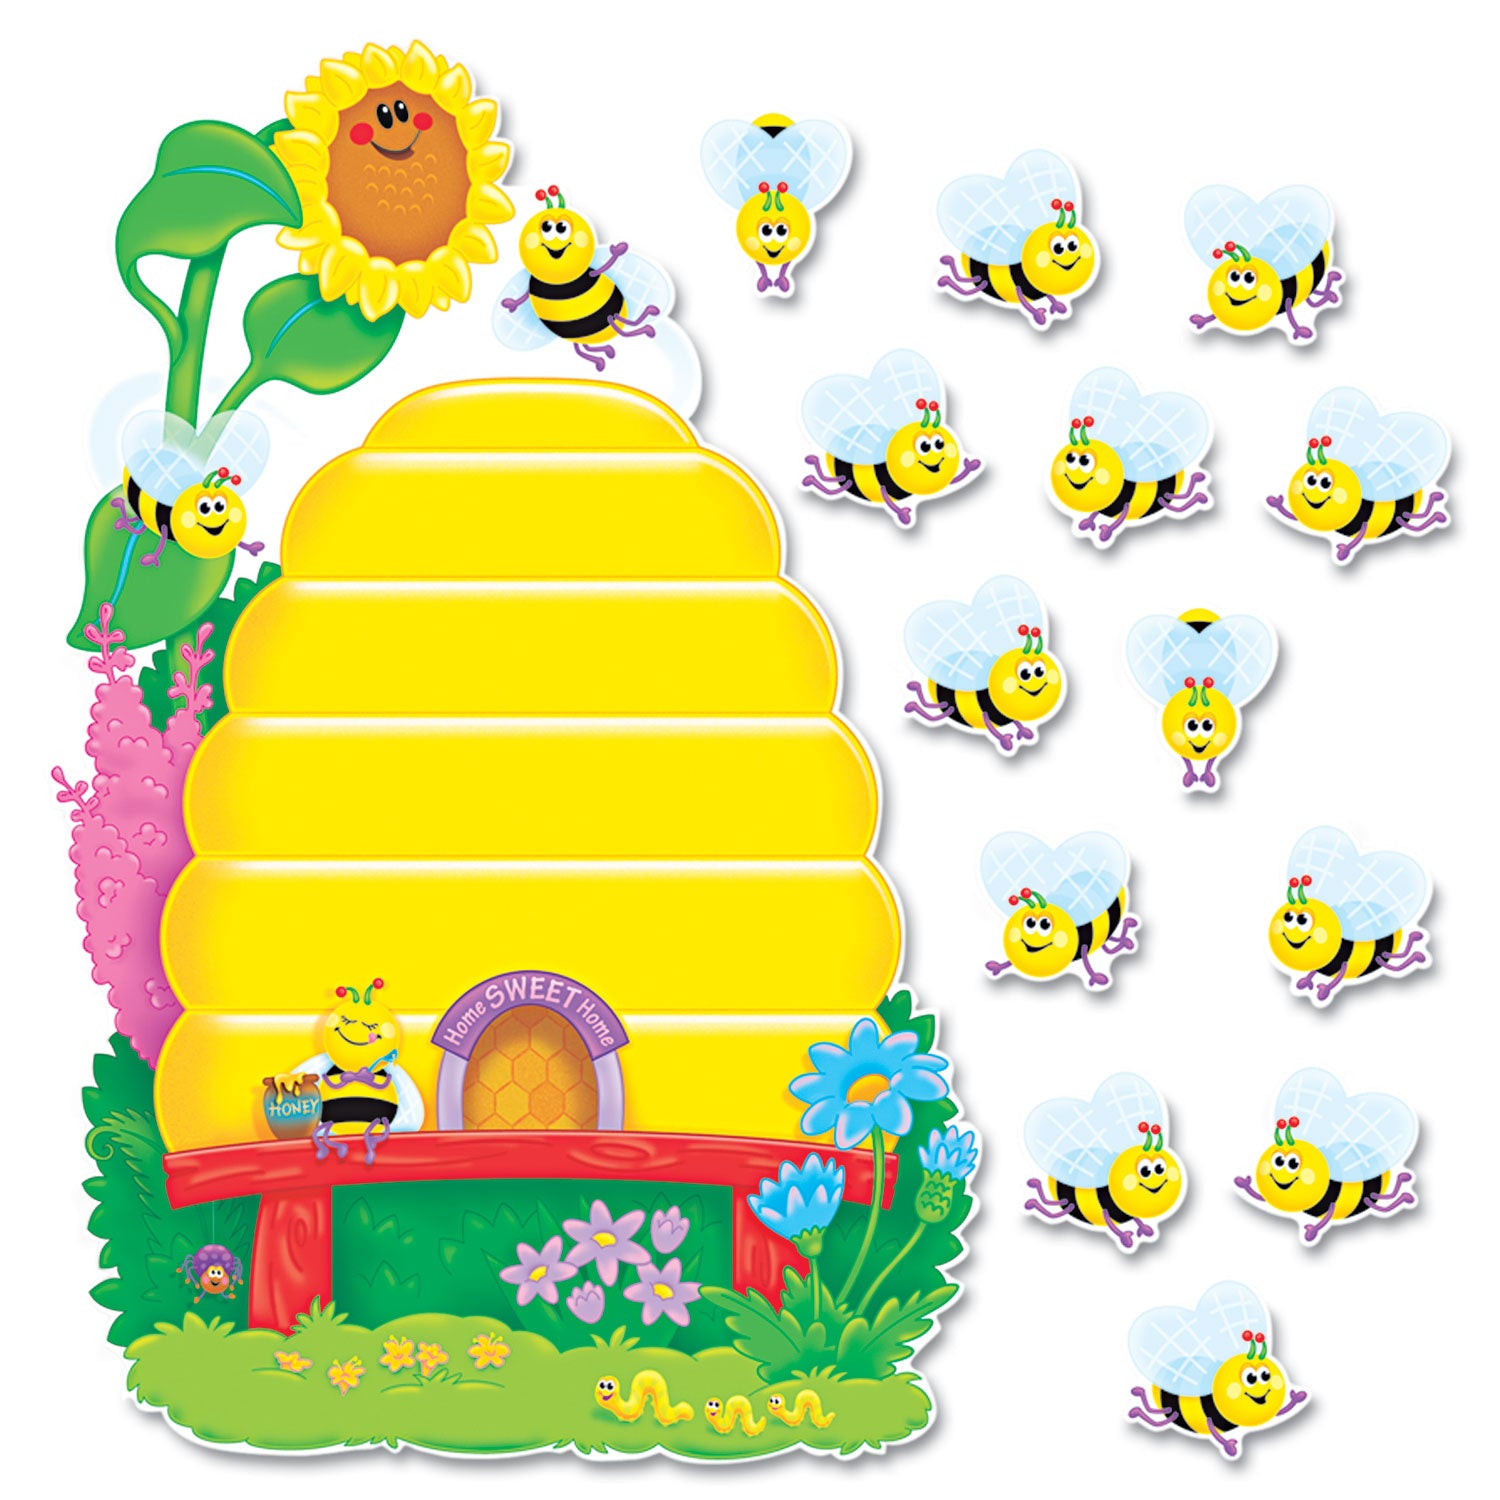 Busy Bees Job Chart Plus Bulletin Board Set 18.25" x 17.5", 38 Pieces - 